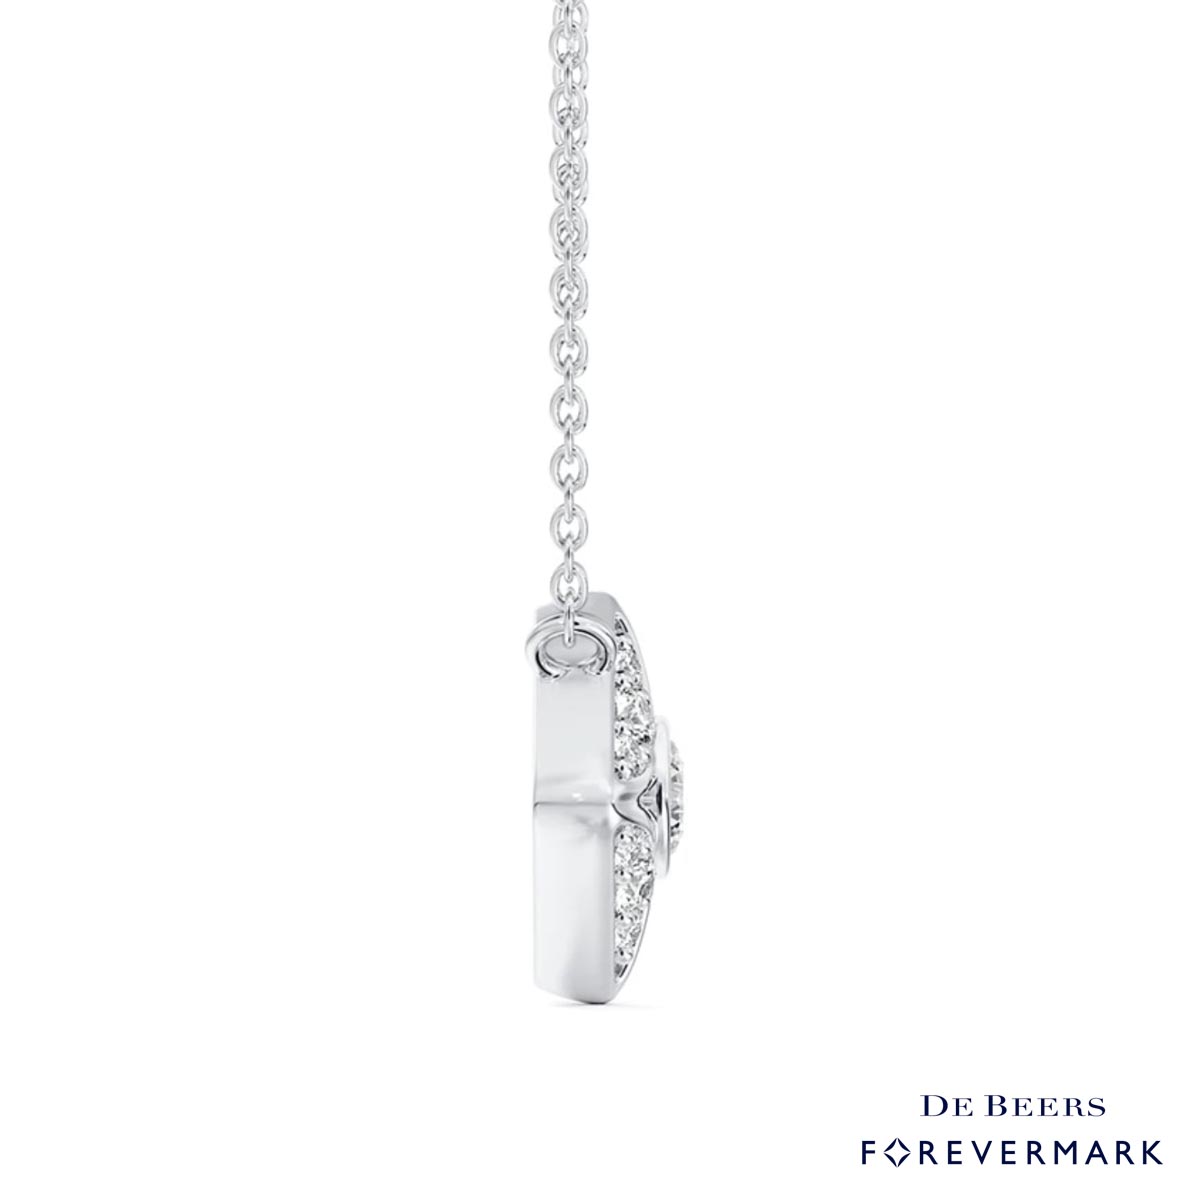 De Beers Forevermark Icon Pave Necklace in 18kt White Gold (1/4ct tw)